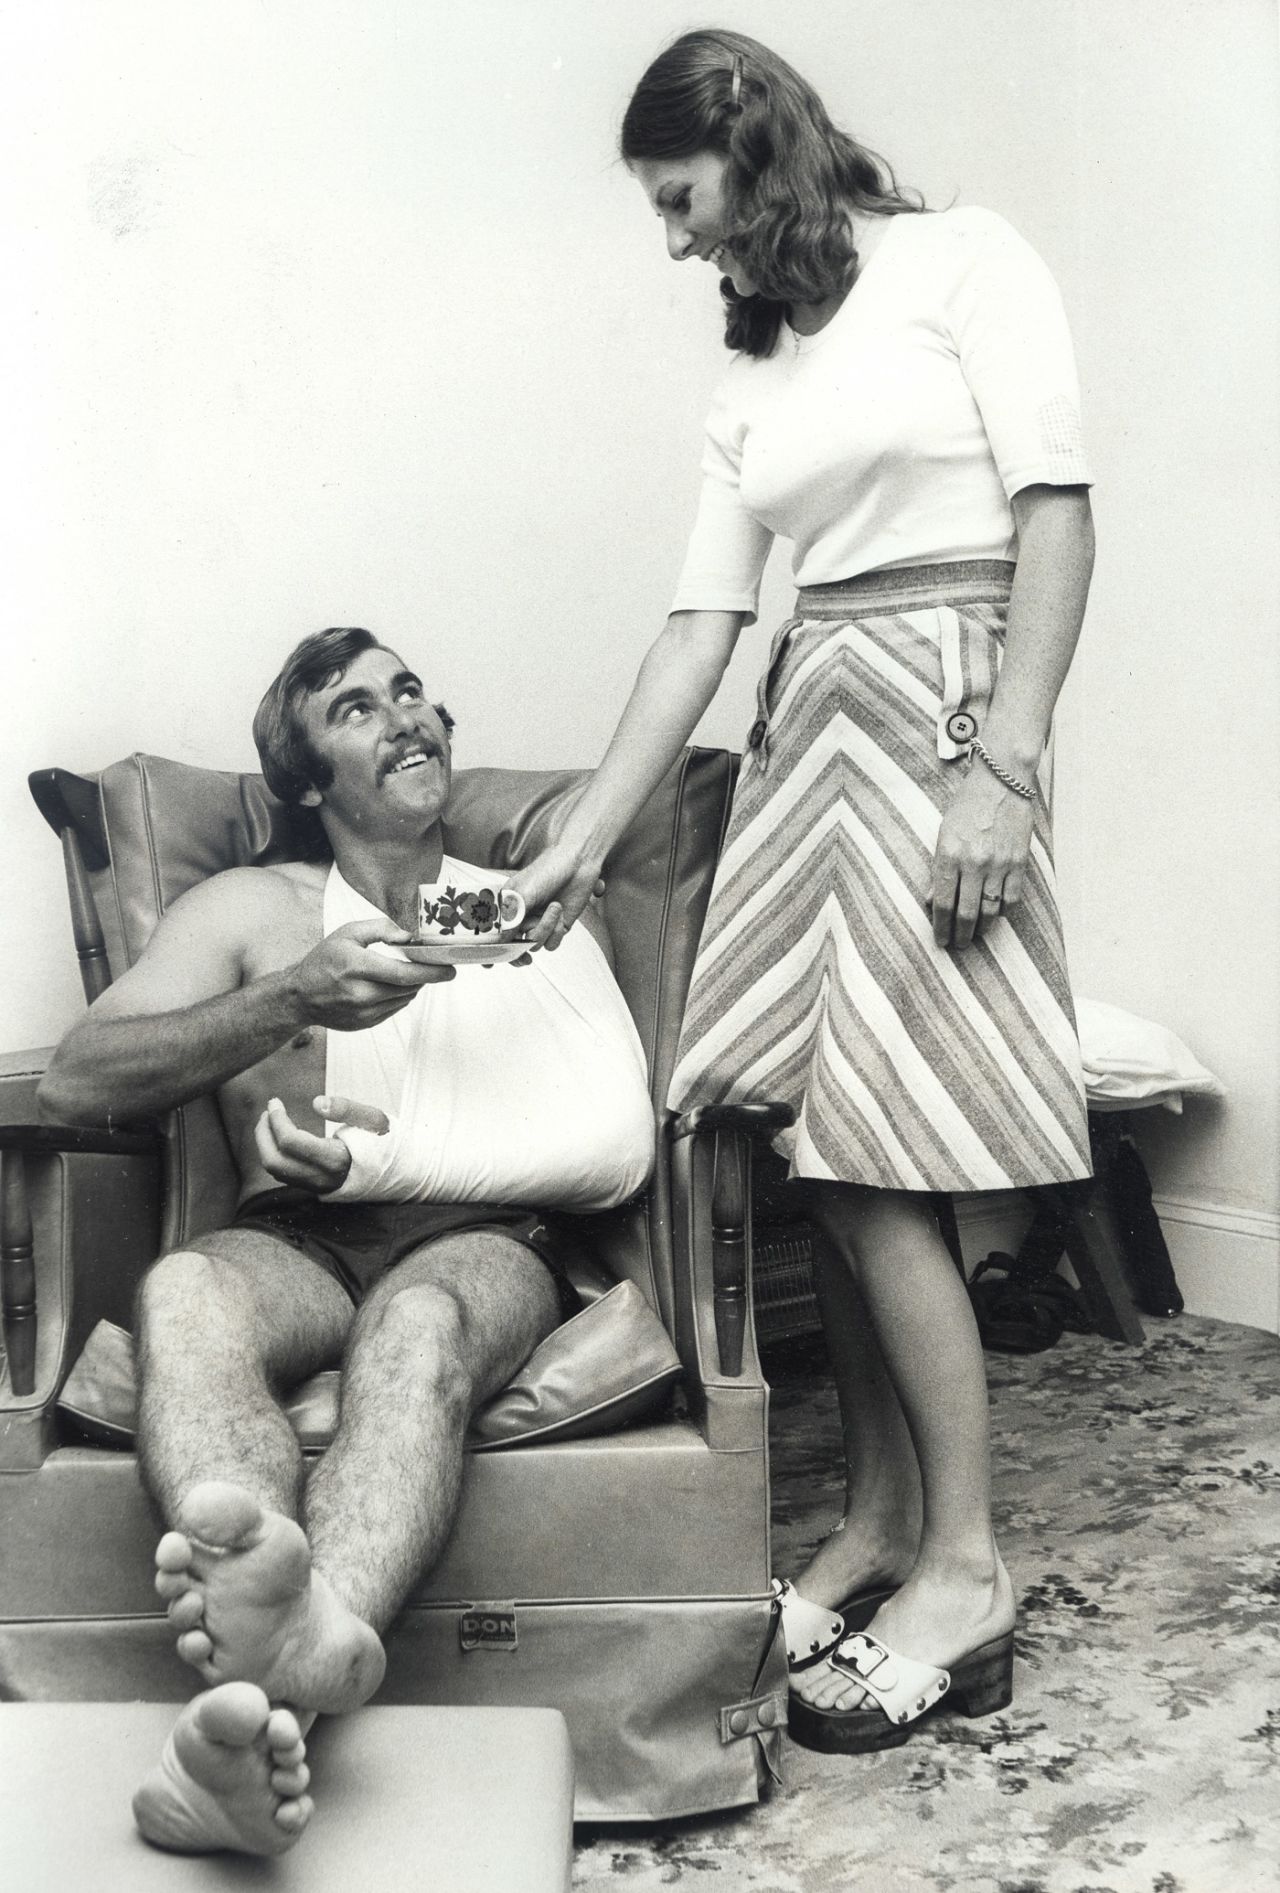 New South Wales opener Len Richardson, whose arm was broken by a Jeff Thomson delivery, gets a cup of coffee from his sister Margaret at their parents' home in Paddington, December 7, 1975